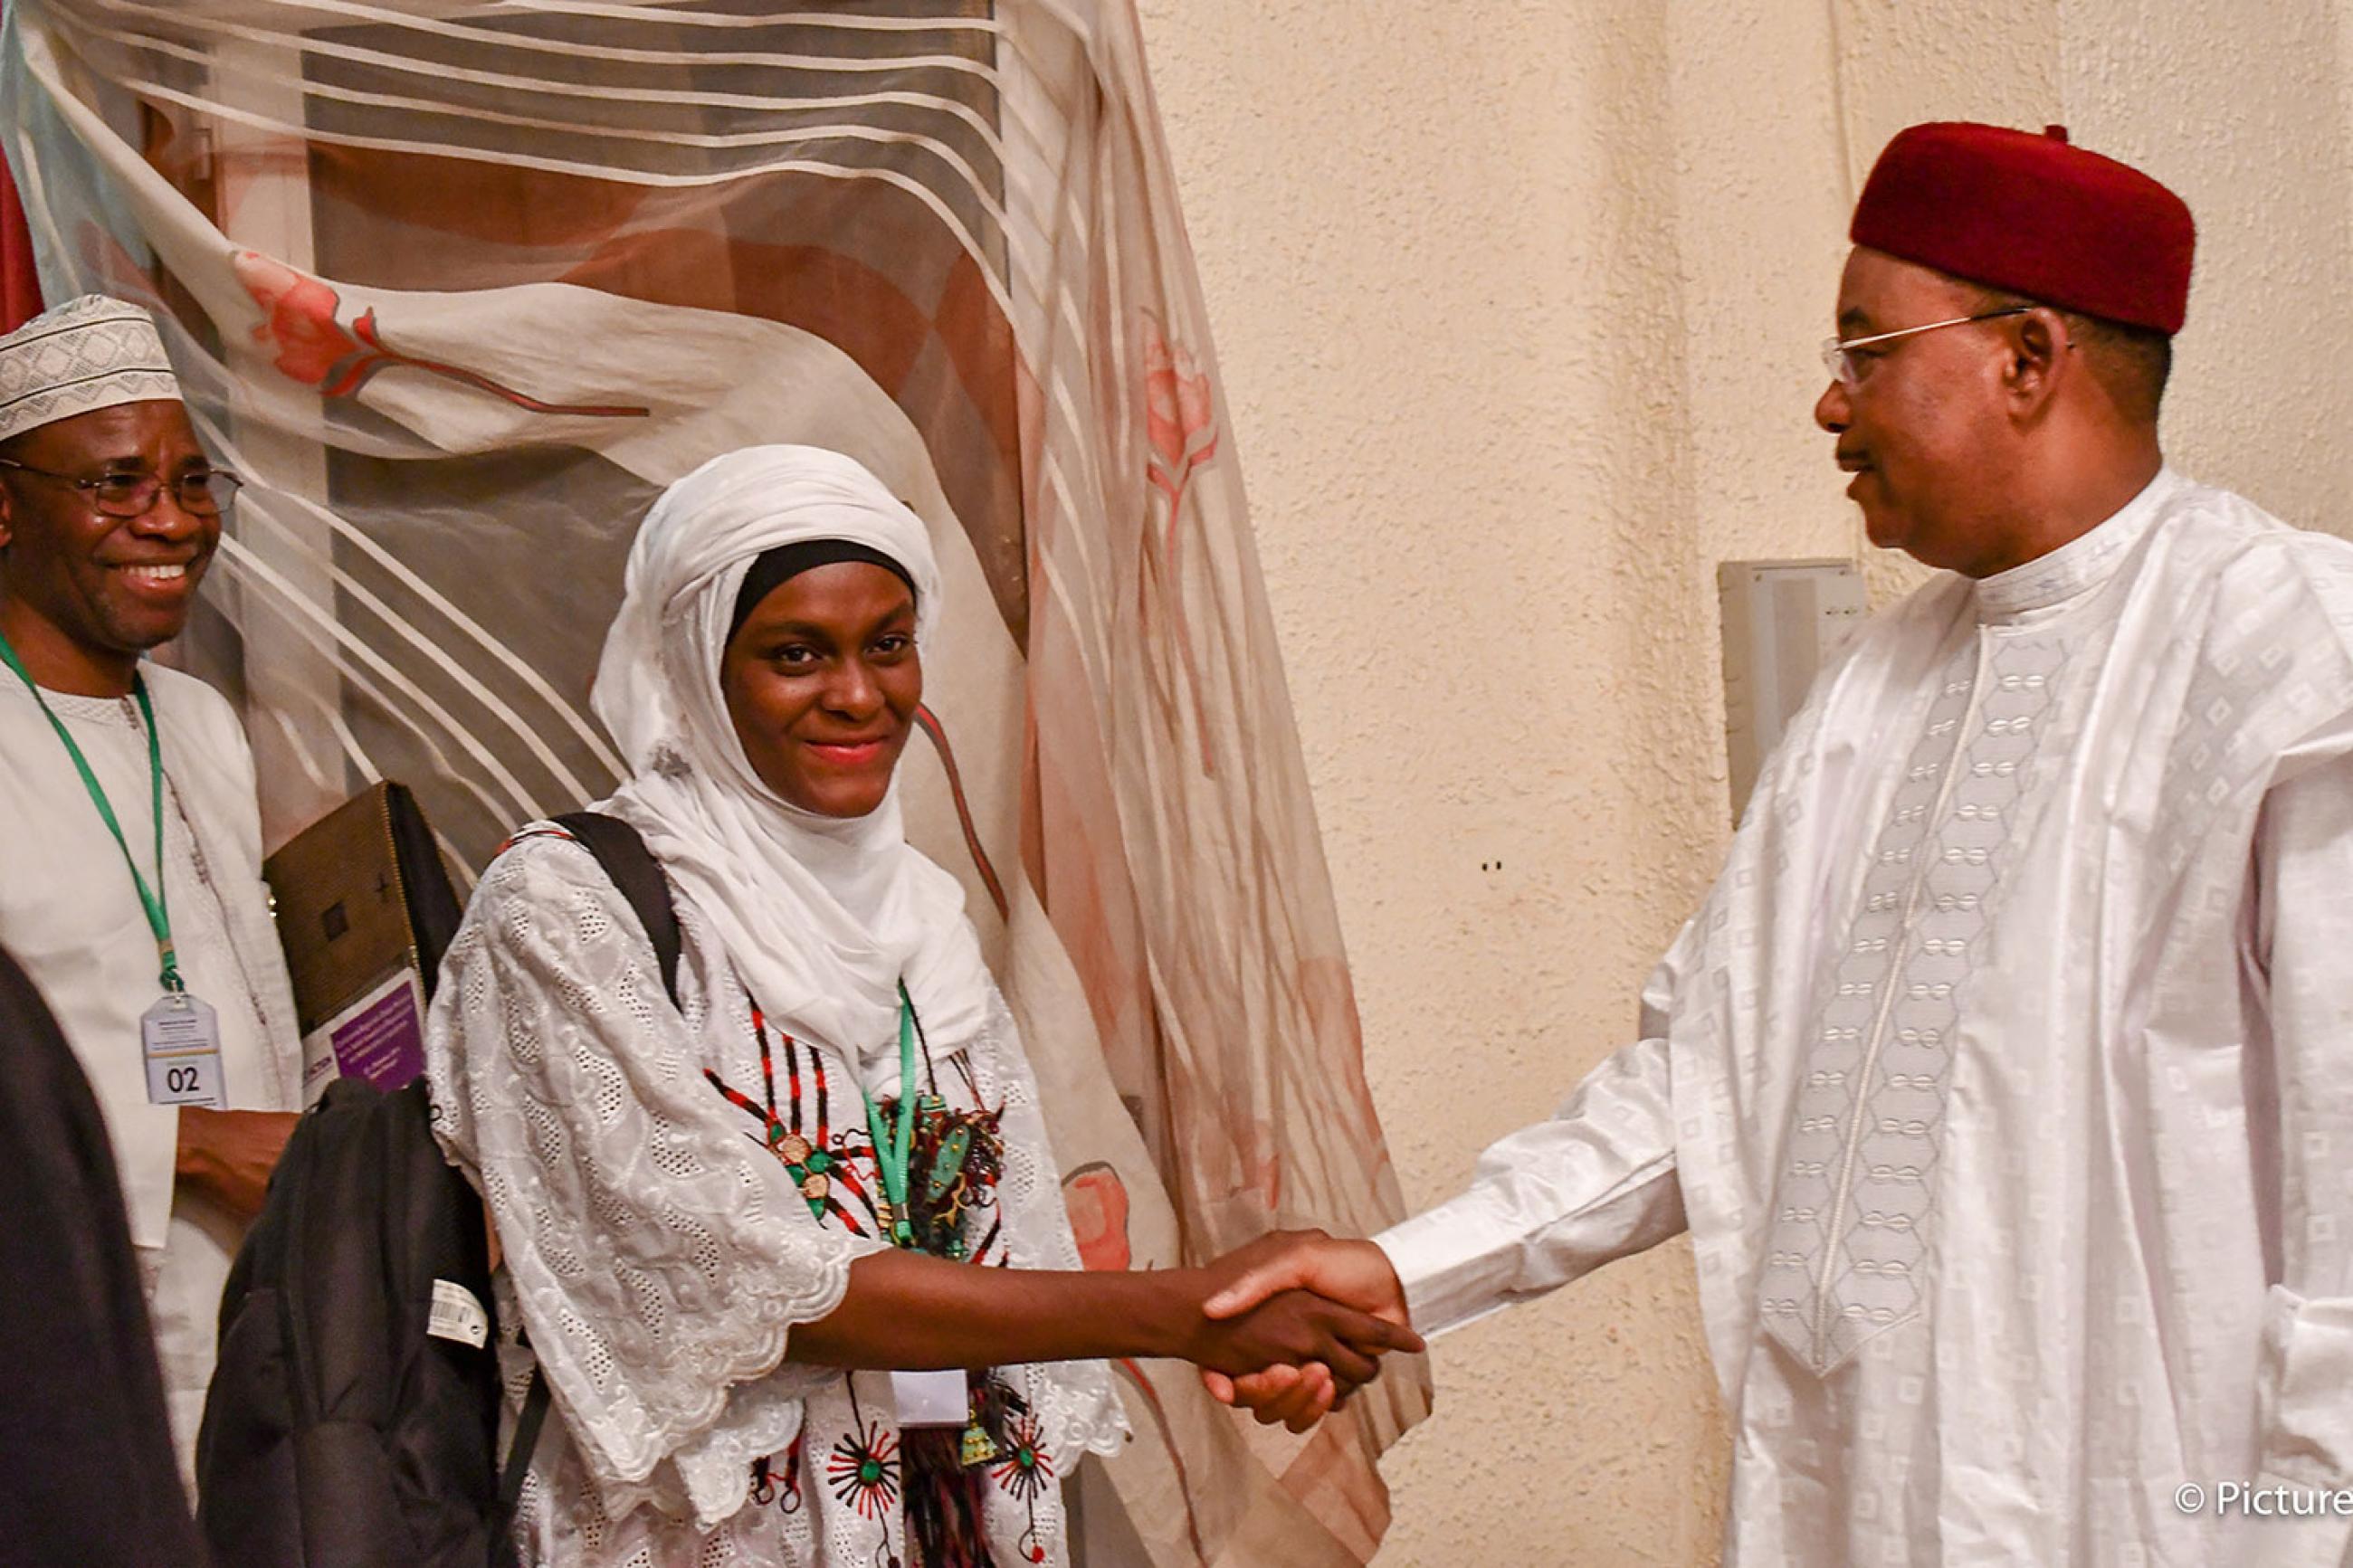 Helping youth directly address their leaders: Mariam Abou Gado, Ouagadougou Partnership Youth Ambassador in Niger, meets with President Issoufou of Niger to discuss recommendations on family planning. The photo shows a smiling Miriam shaking hands with the president. PHOTO courtesy of EtriLabs/Yves Tamomo